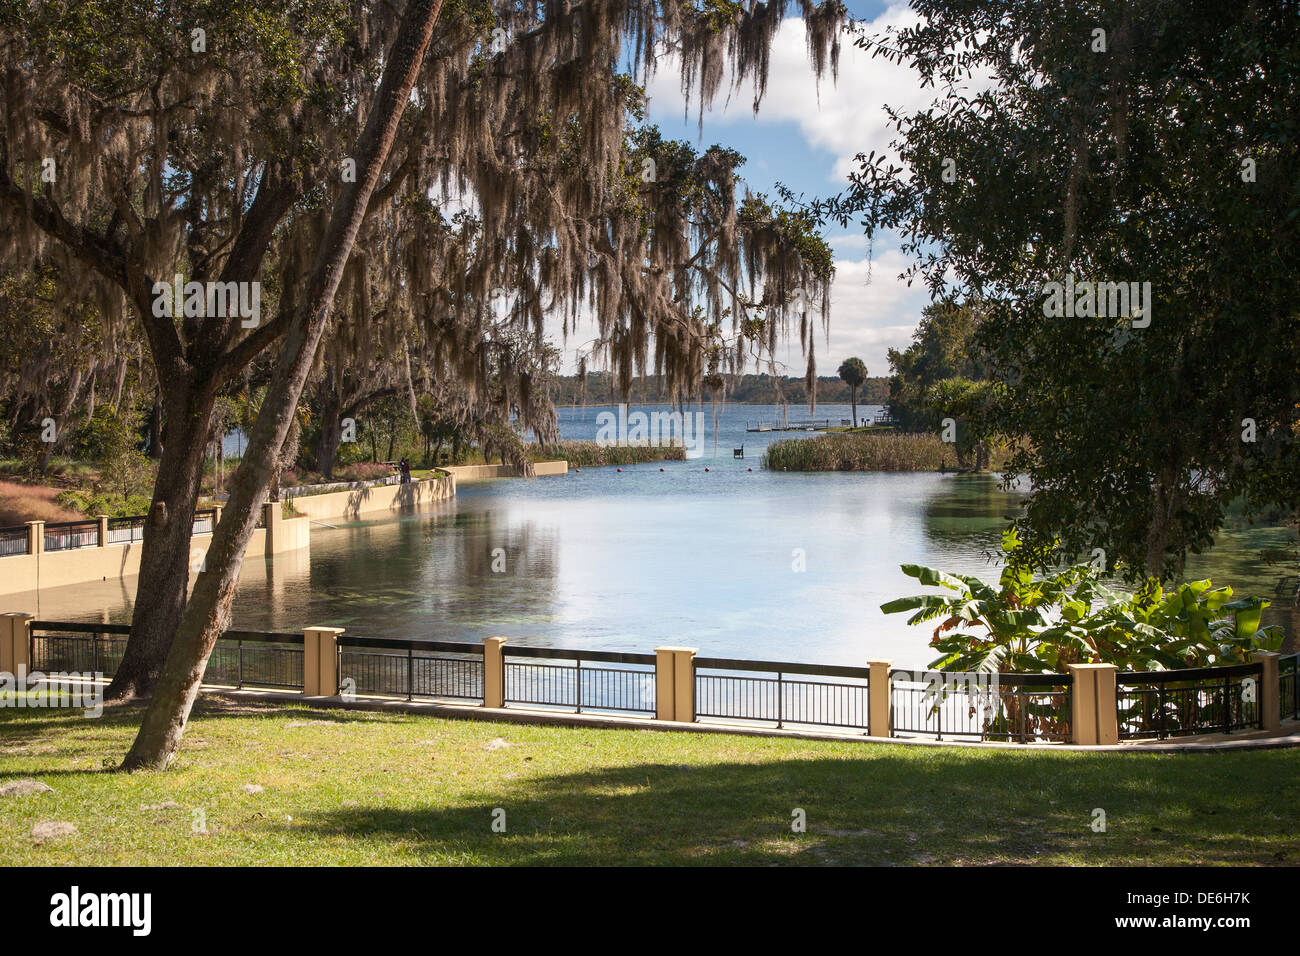 Swimming area at Salt Springs Recreation Area in Central Florida Stock Photo